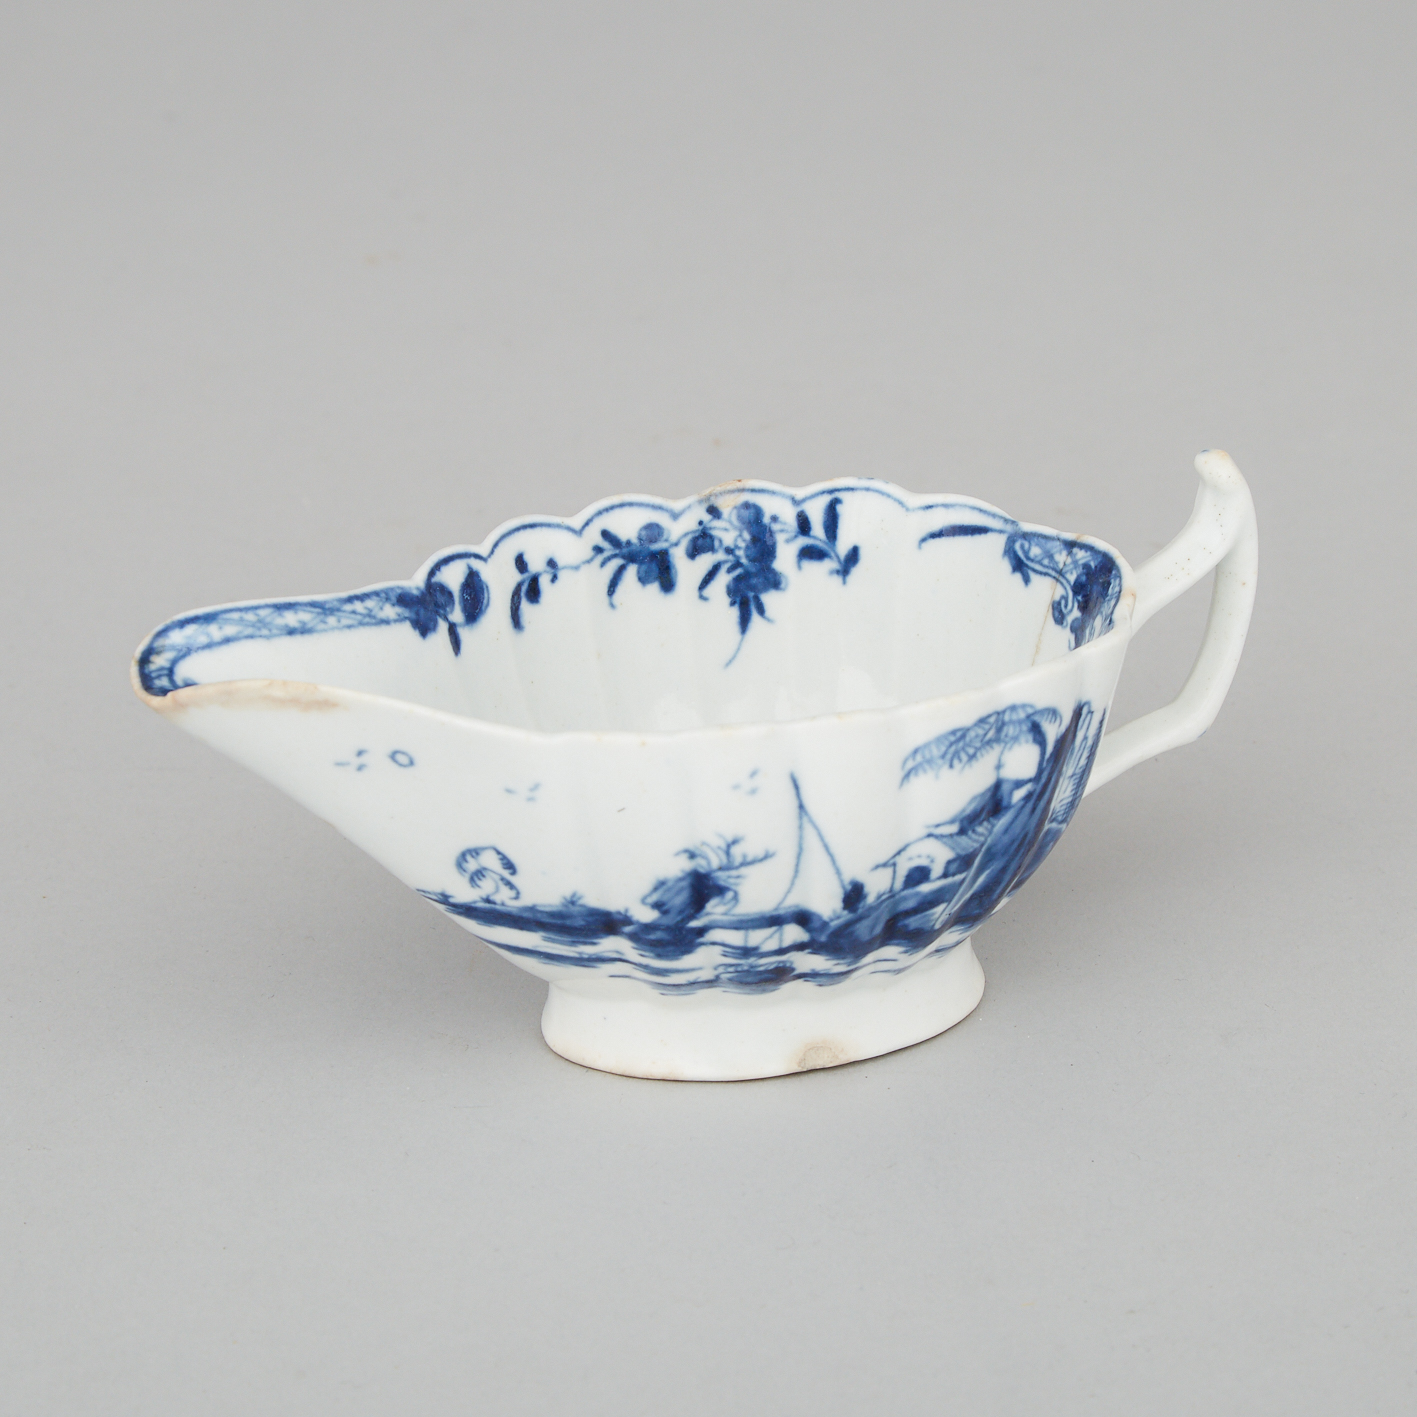 Worcester Blue Painted 'Fringed Tree' Fluted Sauce Boat, c.1755-60